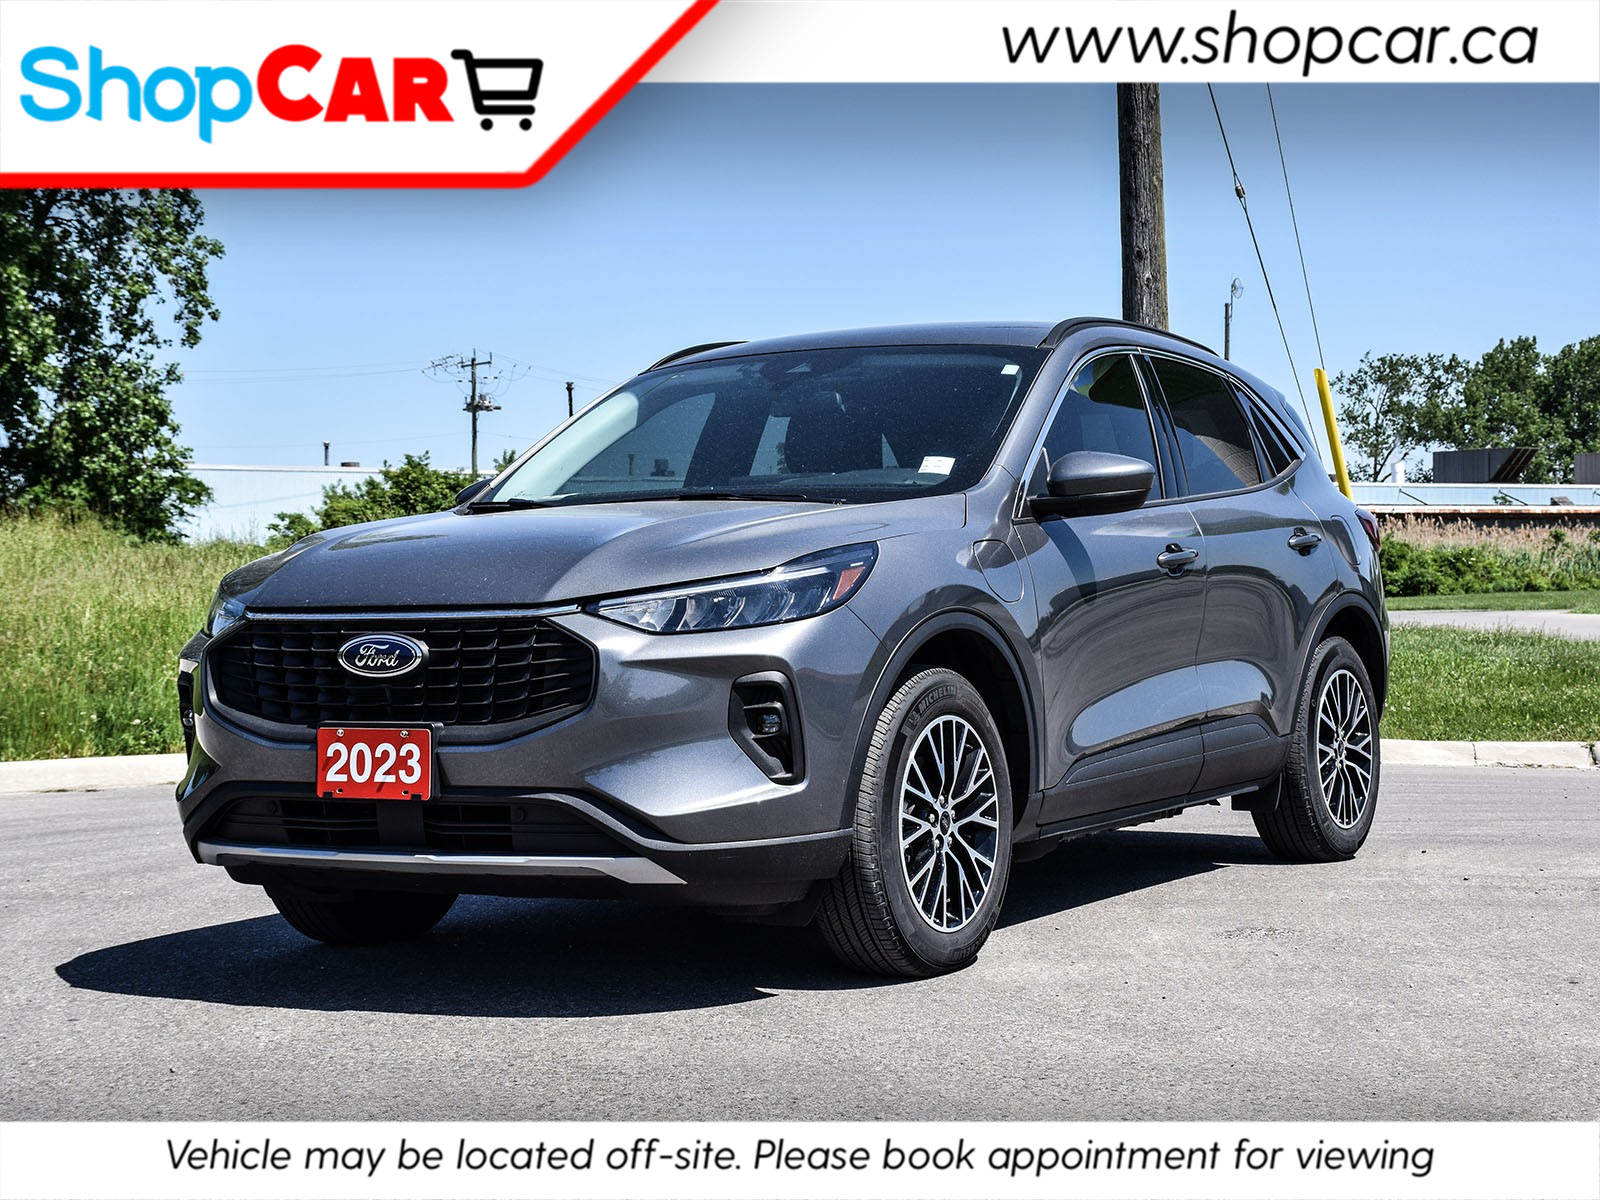 2023 Ford Escape Price Reduction | PHEV | Heated Seats | Nav